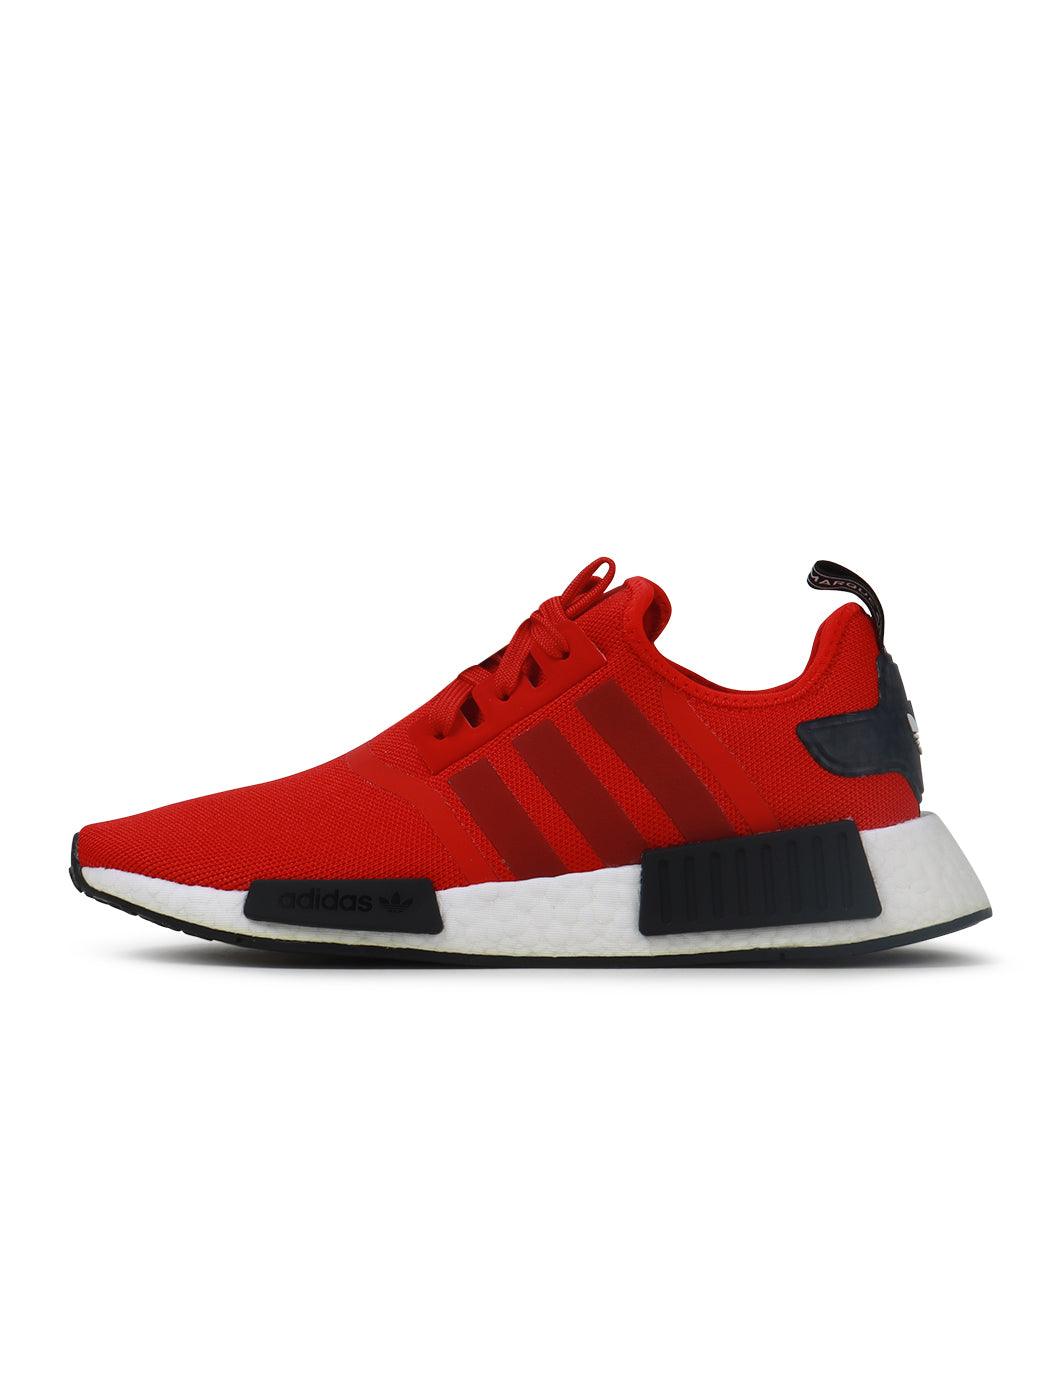 adidas nmd r1 men's clearance